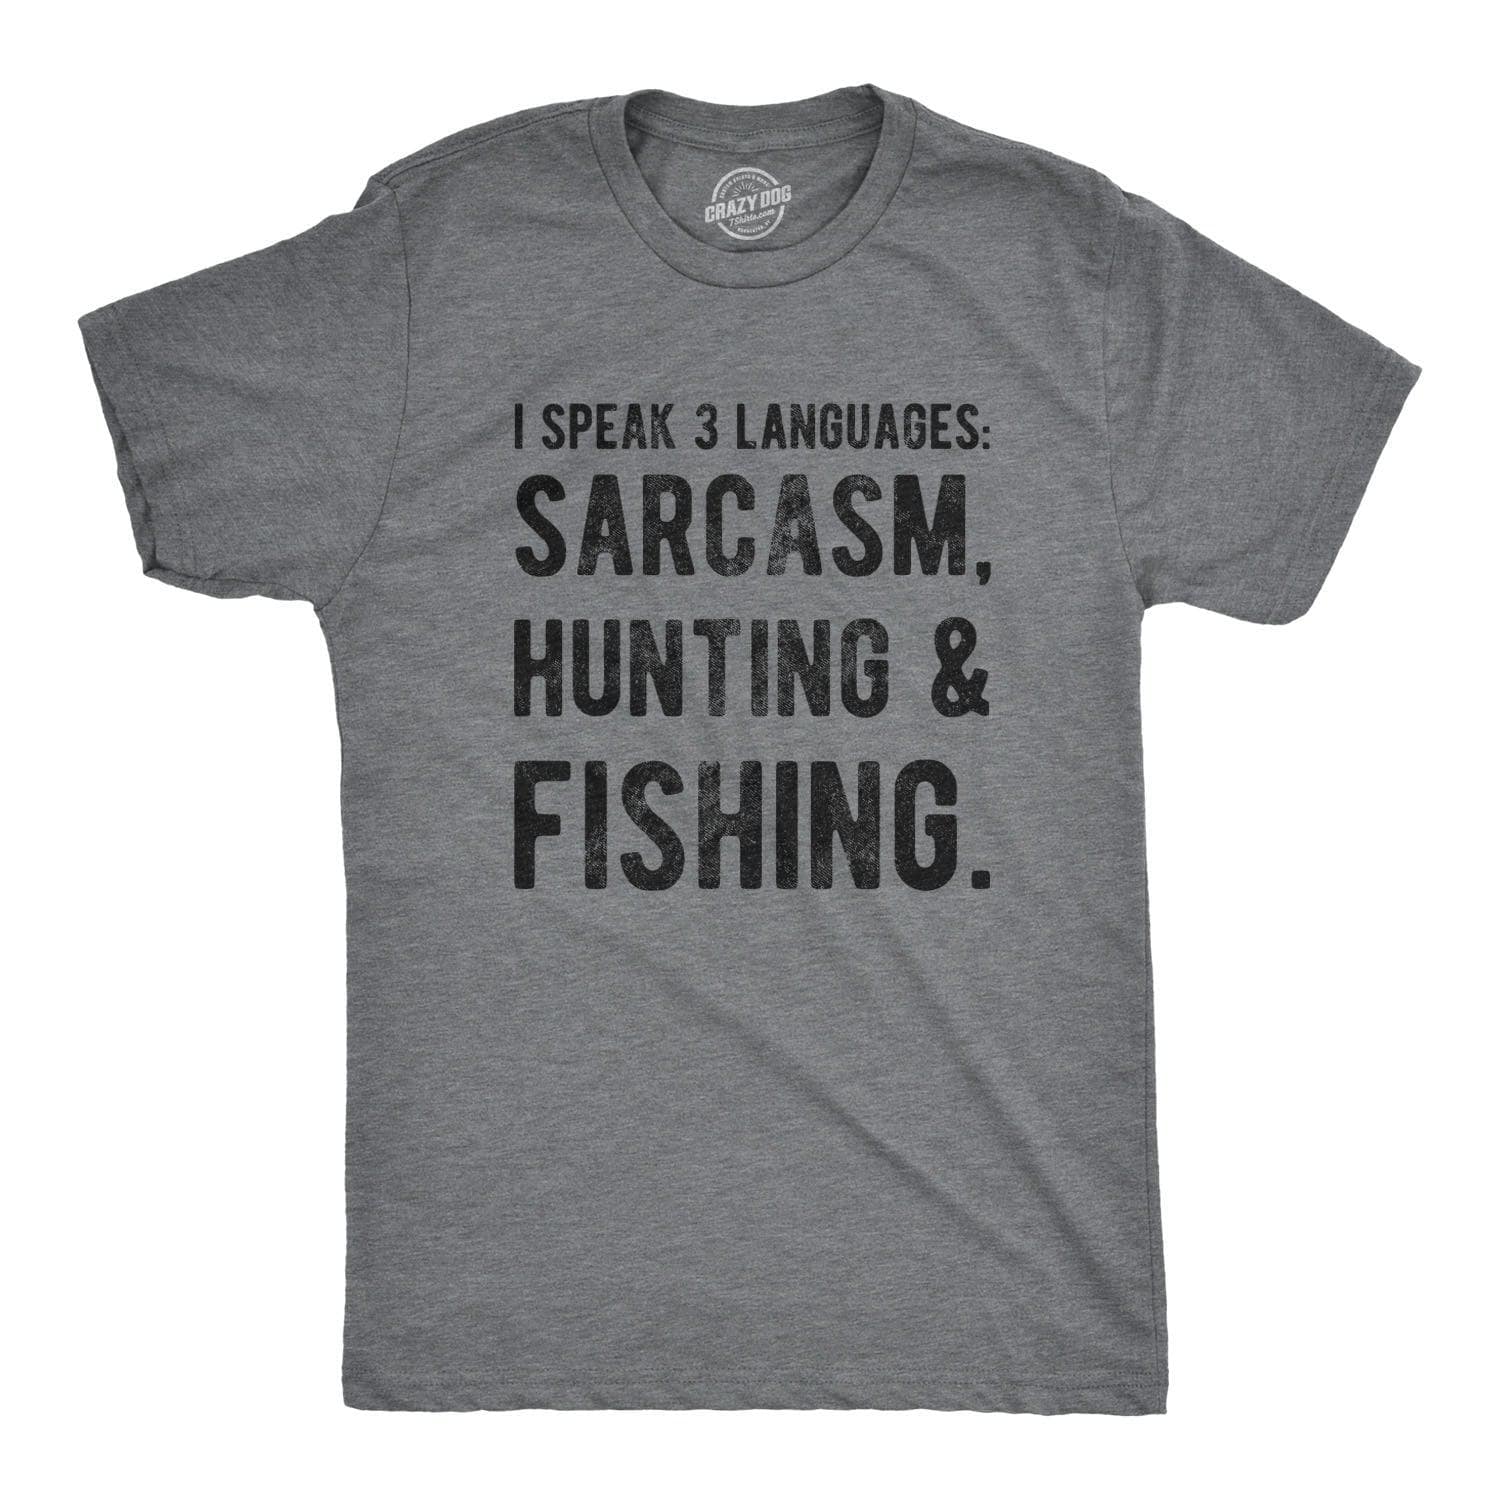 I Like Hunting And Maybe 3 People Men's T Shirt - Crazy Dog T-Shirts